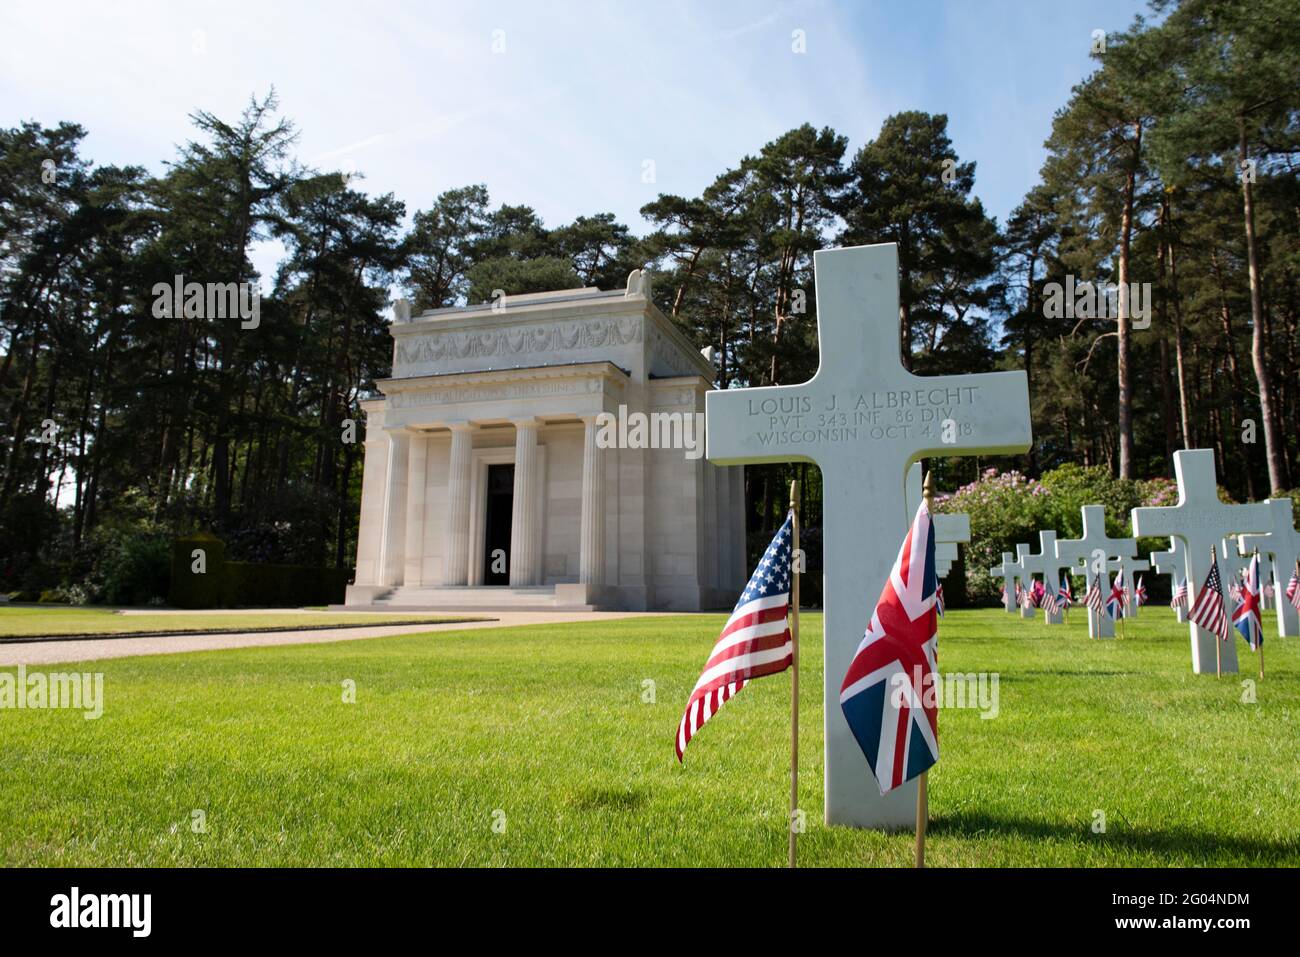 Brookwood, UK. 30th May, 2021. U.S. and British flags mark the graves in observance of Memorial Day in front of the chapel memorial at the Brookwood American Military Cemetery, May 30, 2021 in Brookwood, Surrey, England. Brookwood is the only American Military Cemetery of World War I in the British Isles and contains the graves of 468 American war dead. Credit: Planetpix/Alamy Live News Stock Photo